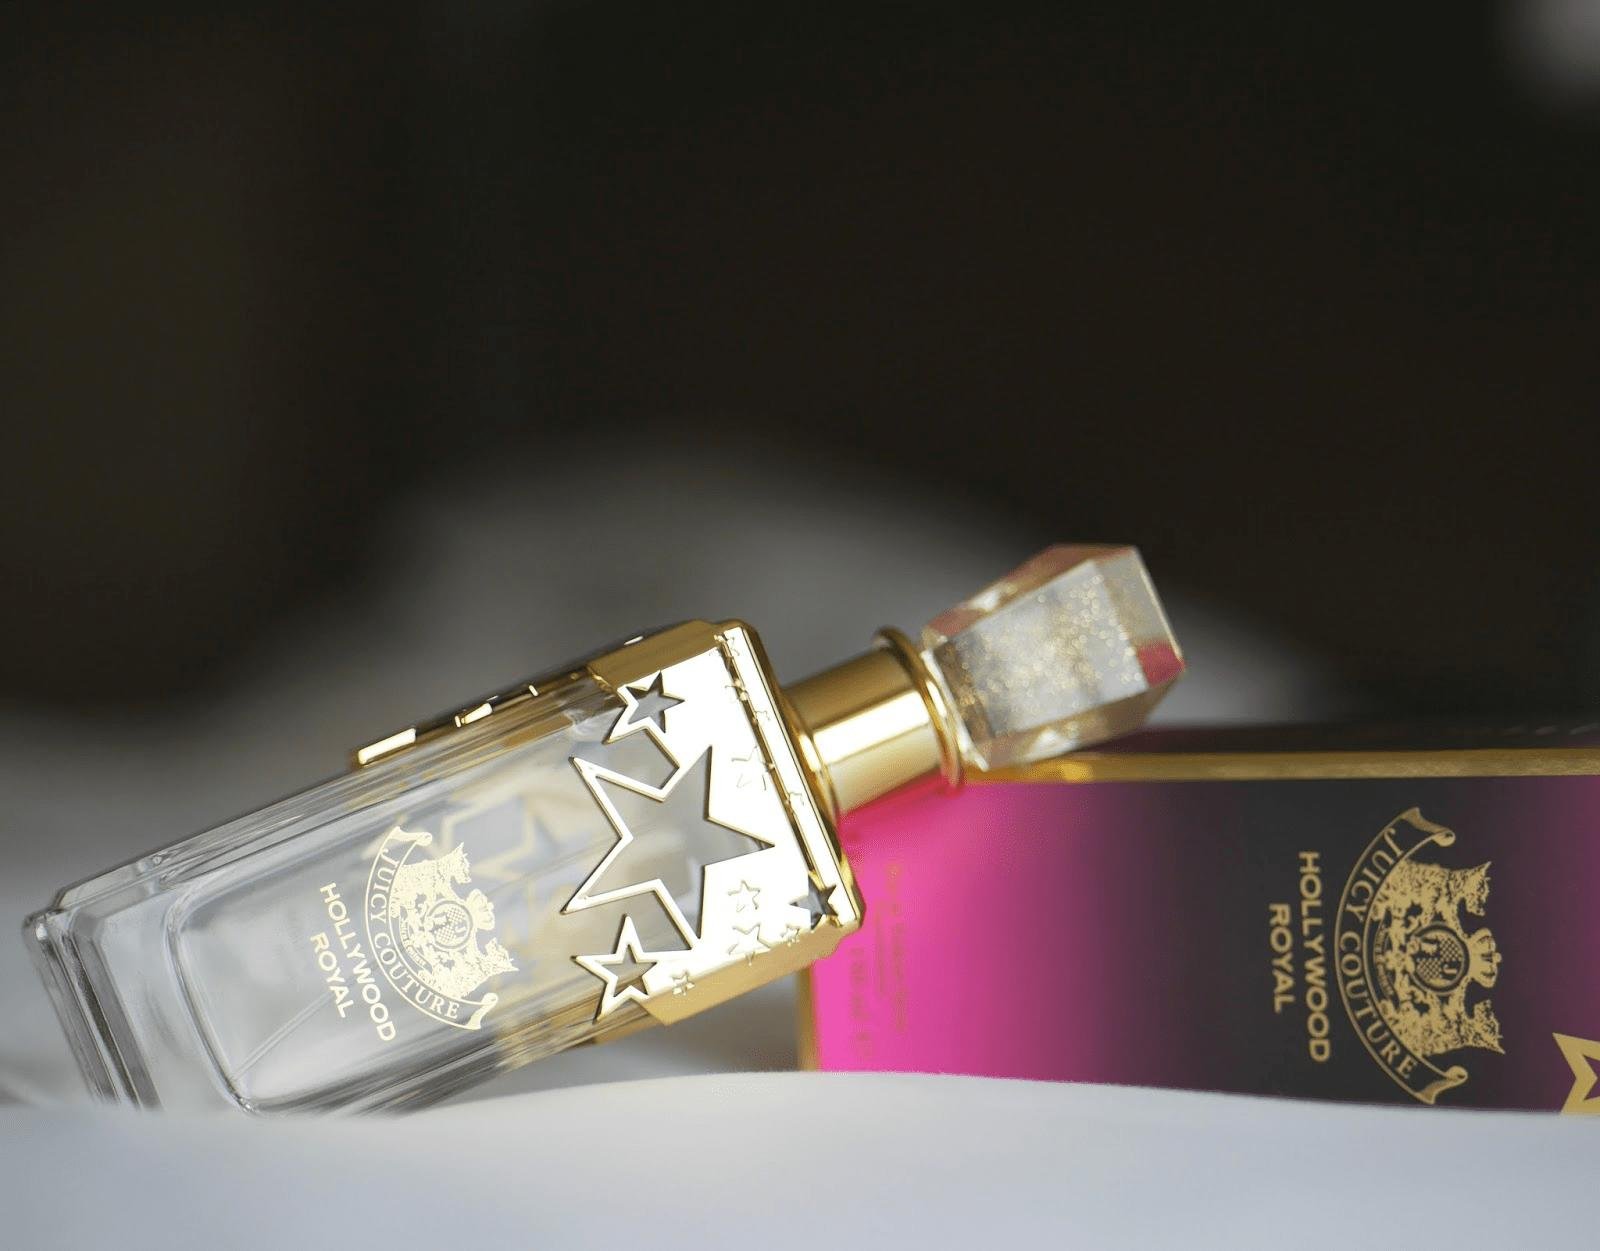 Juicy Couture Viva La Juicy Rose ngọt ngào